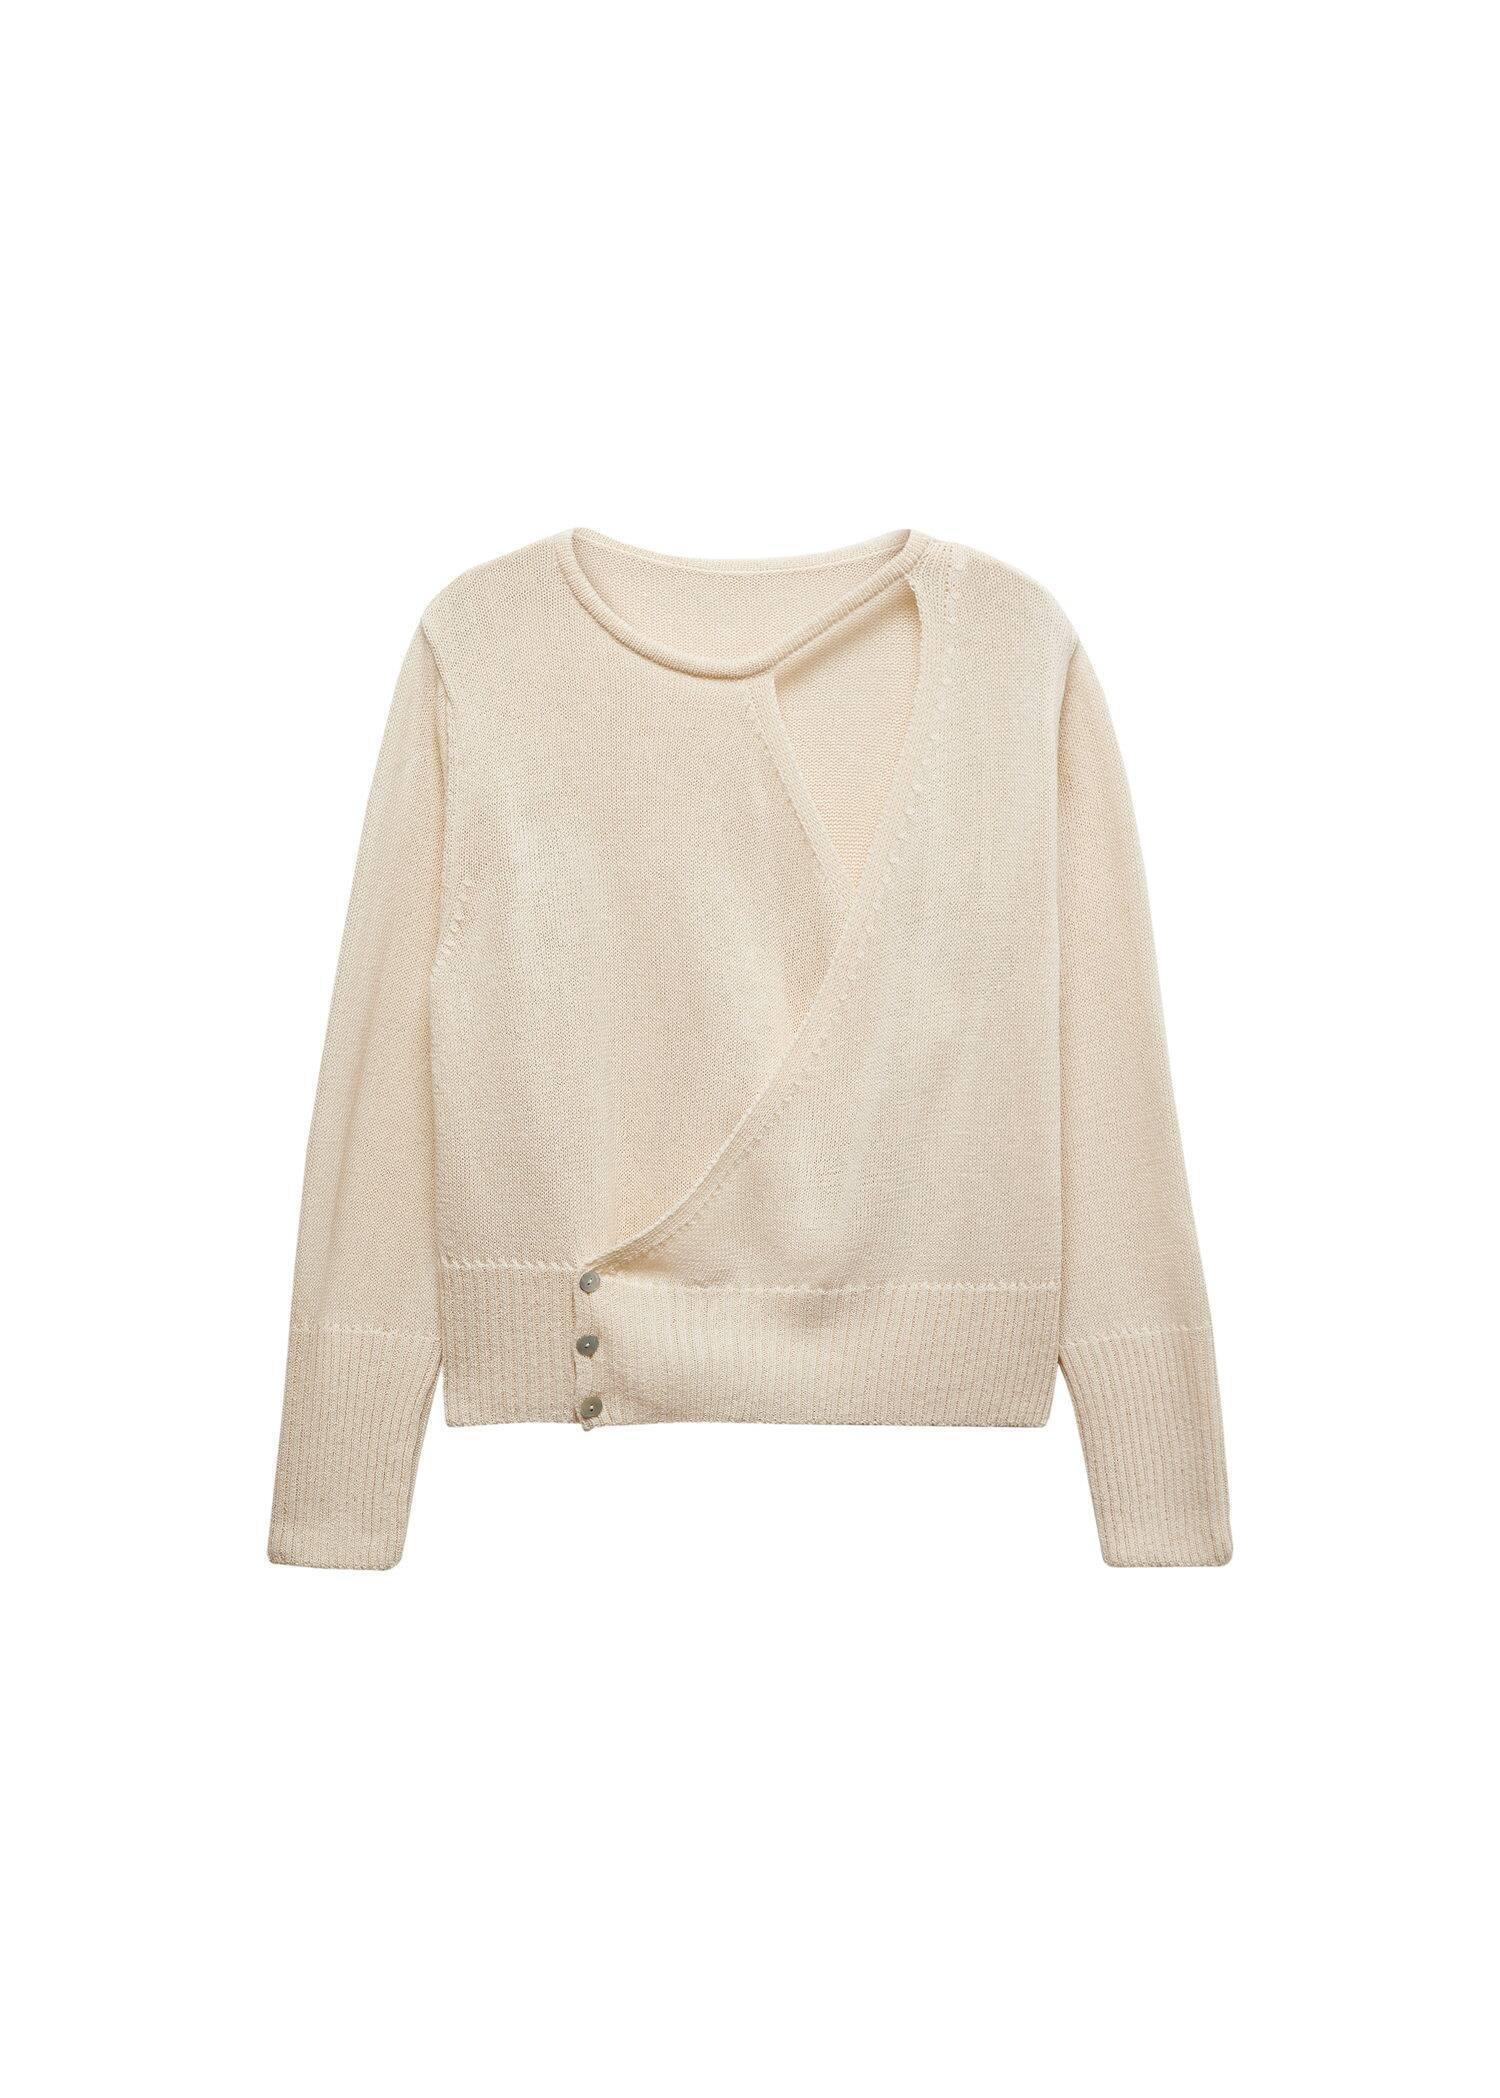 Mango - Beige Pullover Crossover With Slit Detail